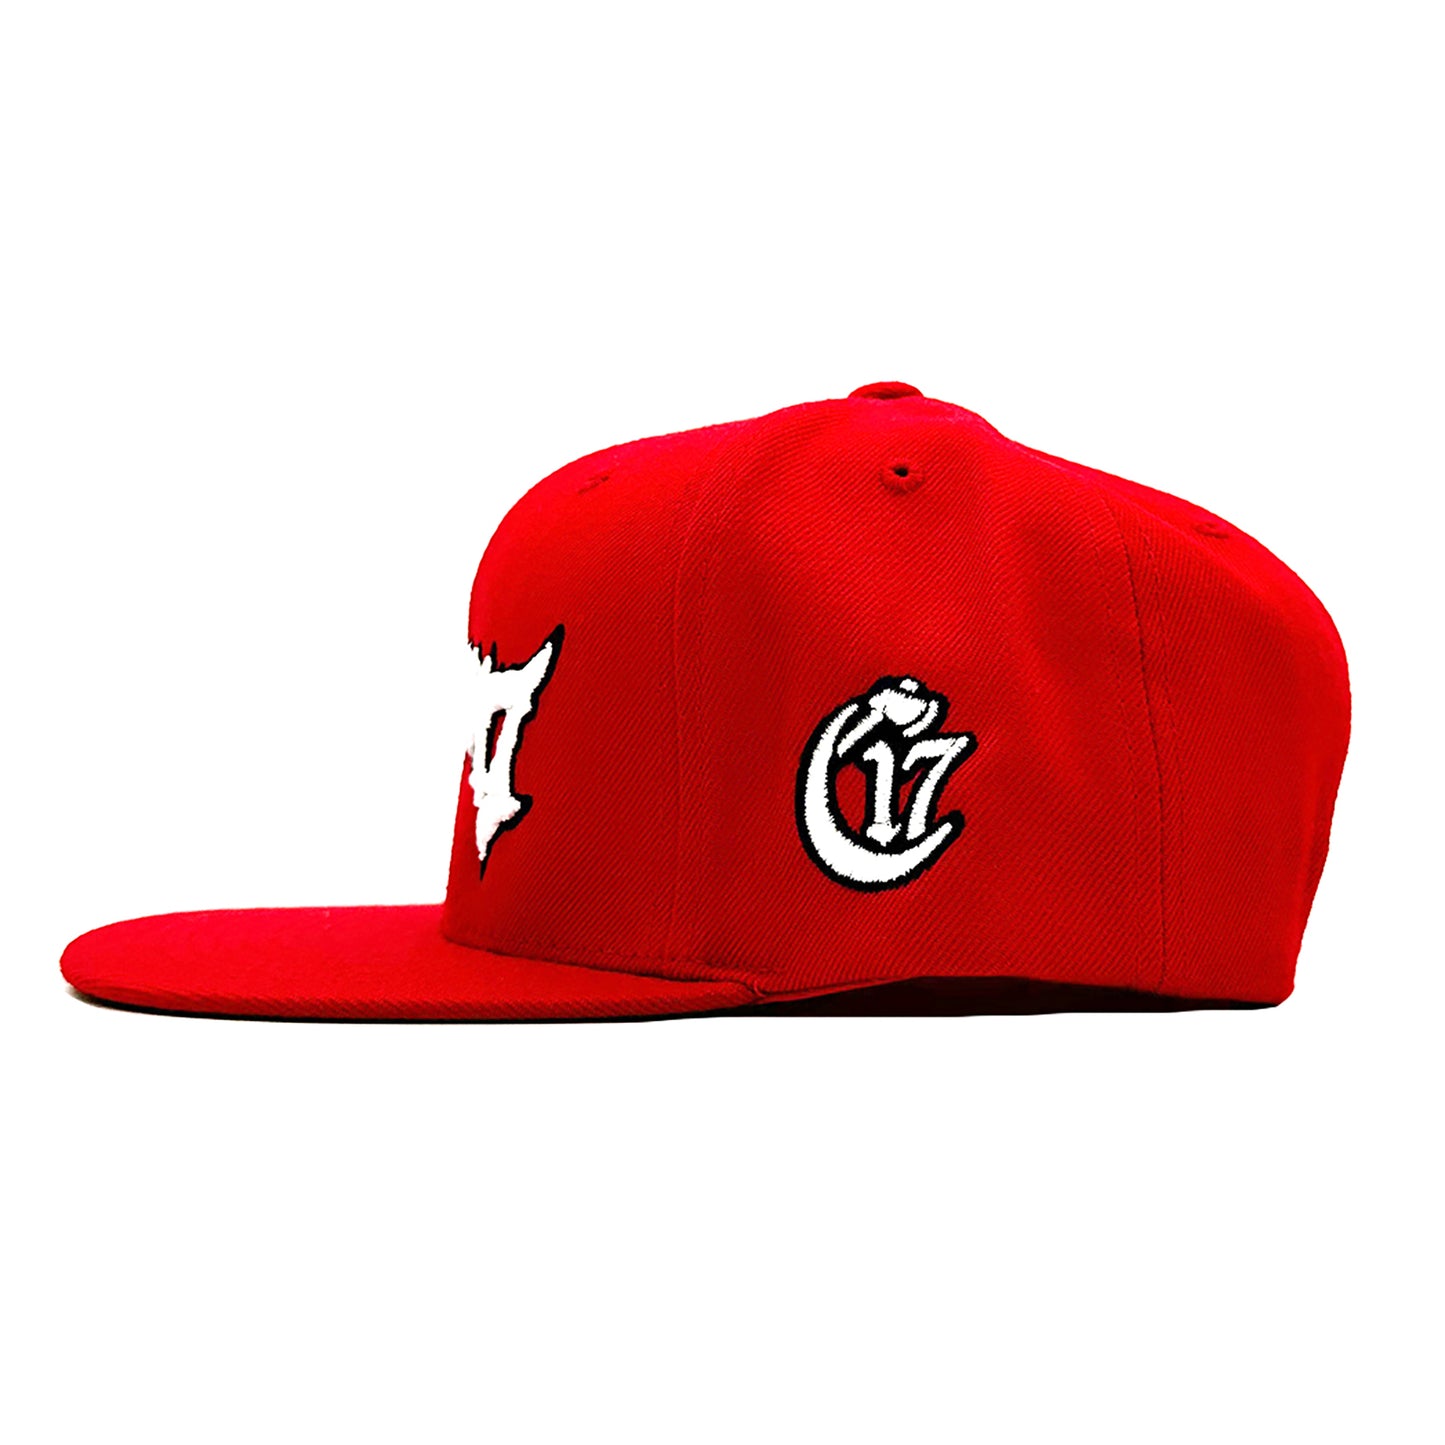 Chapter 17 text logo - Snapback - 2023 - Red